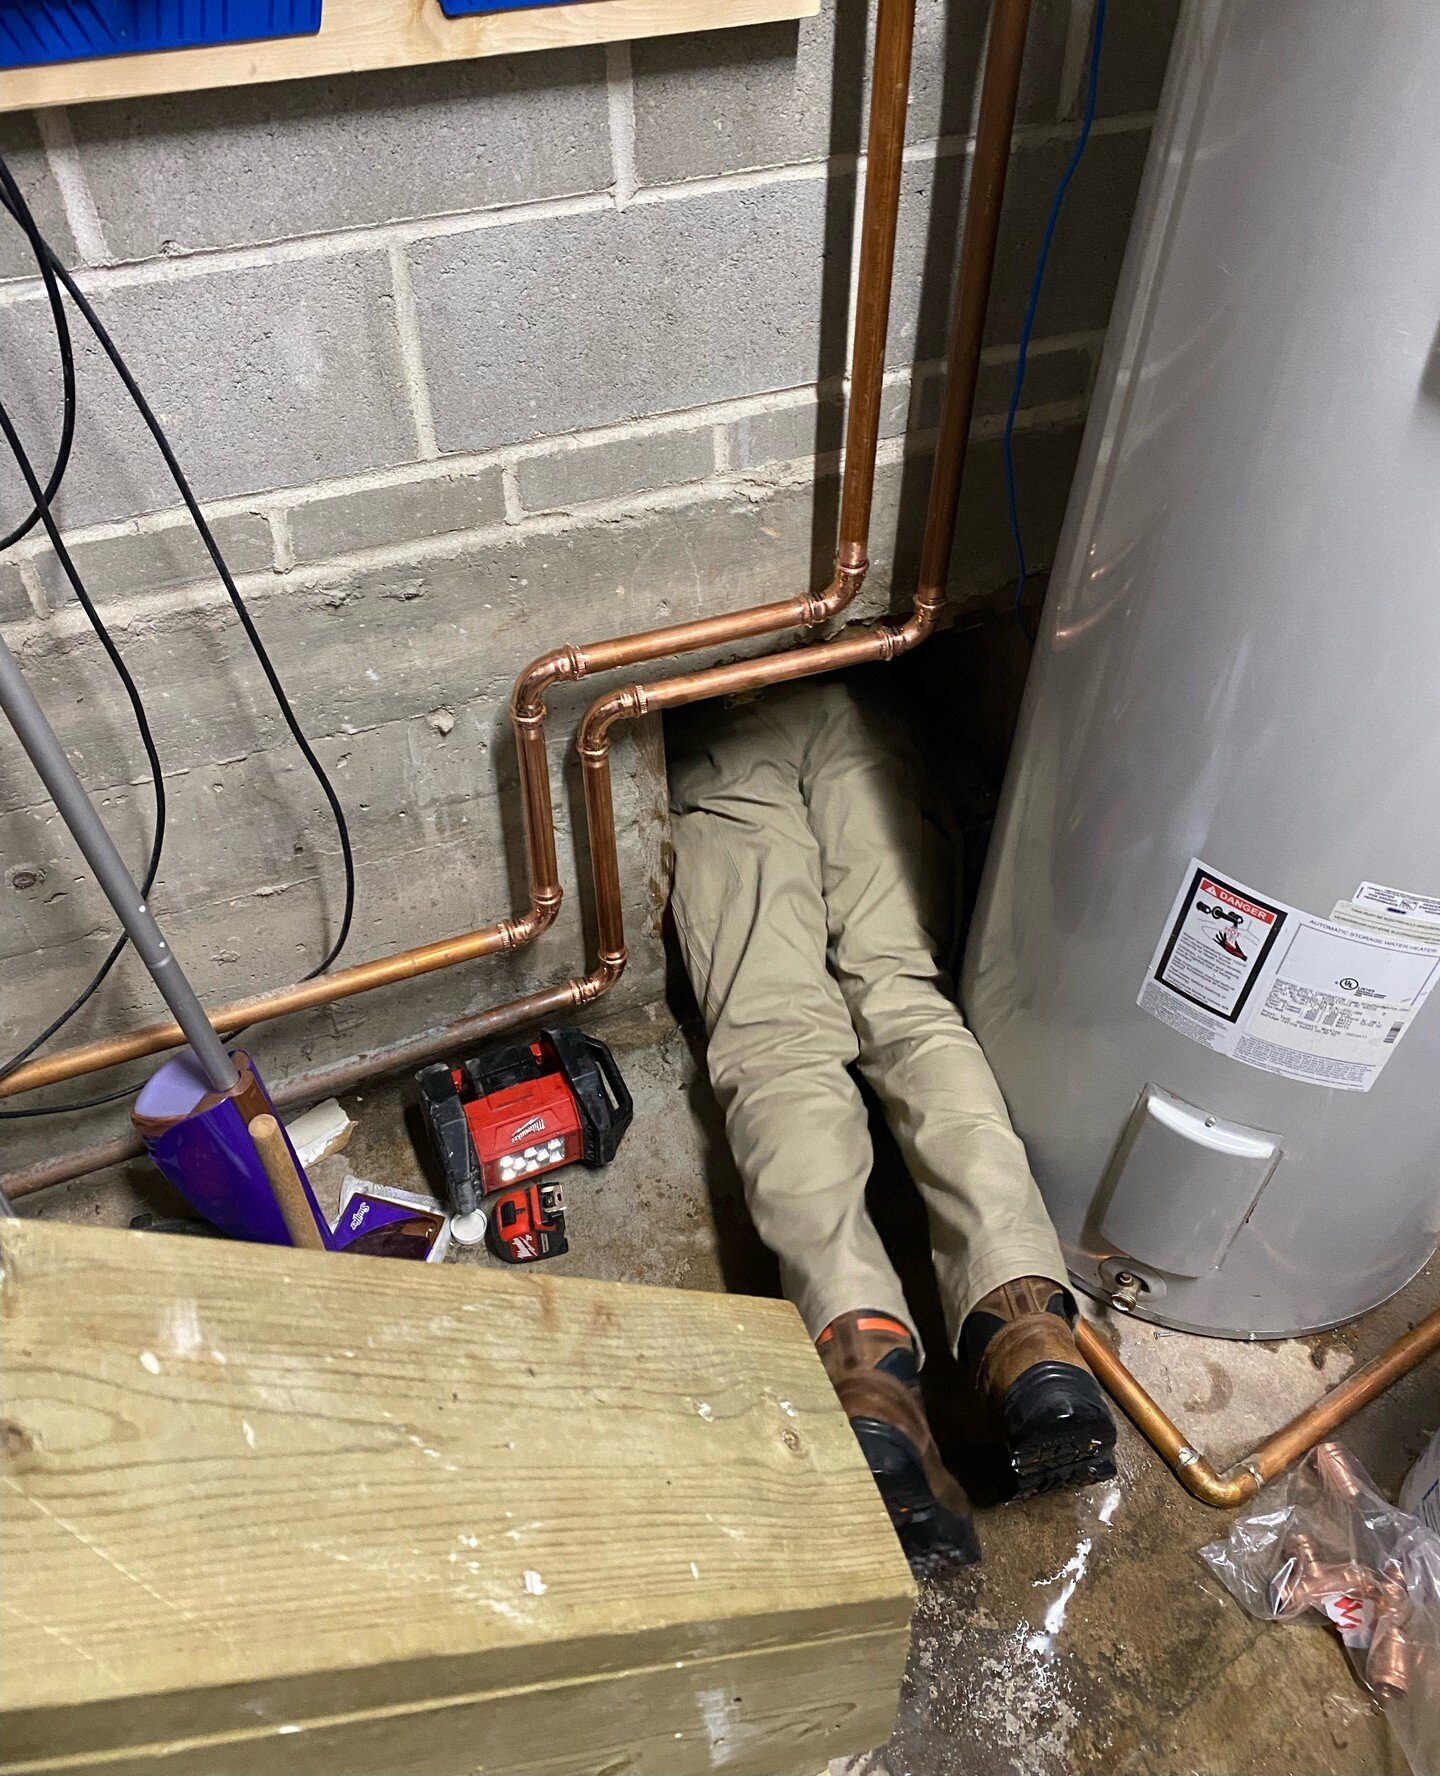 We've got all the equipment to take care of all your Plumbing, Heating &amp; Cooling needs. Got a tight and awkward space to work in? No worries we have an Evan (or a Neil) for that!